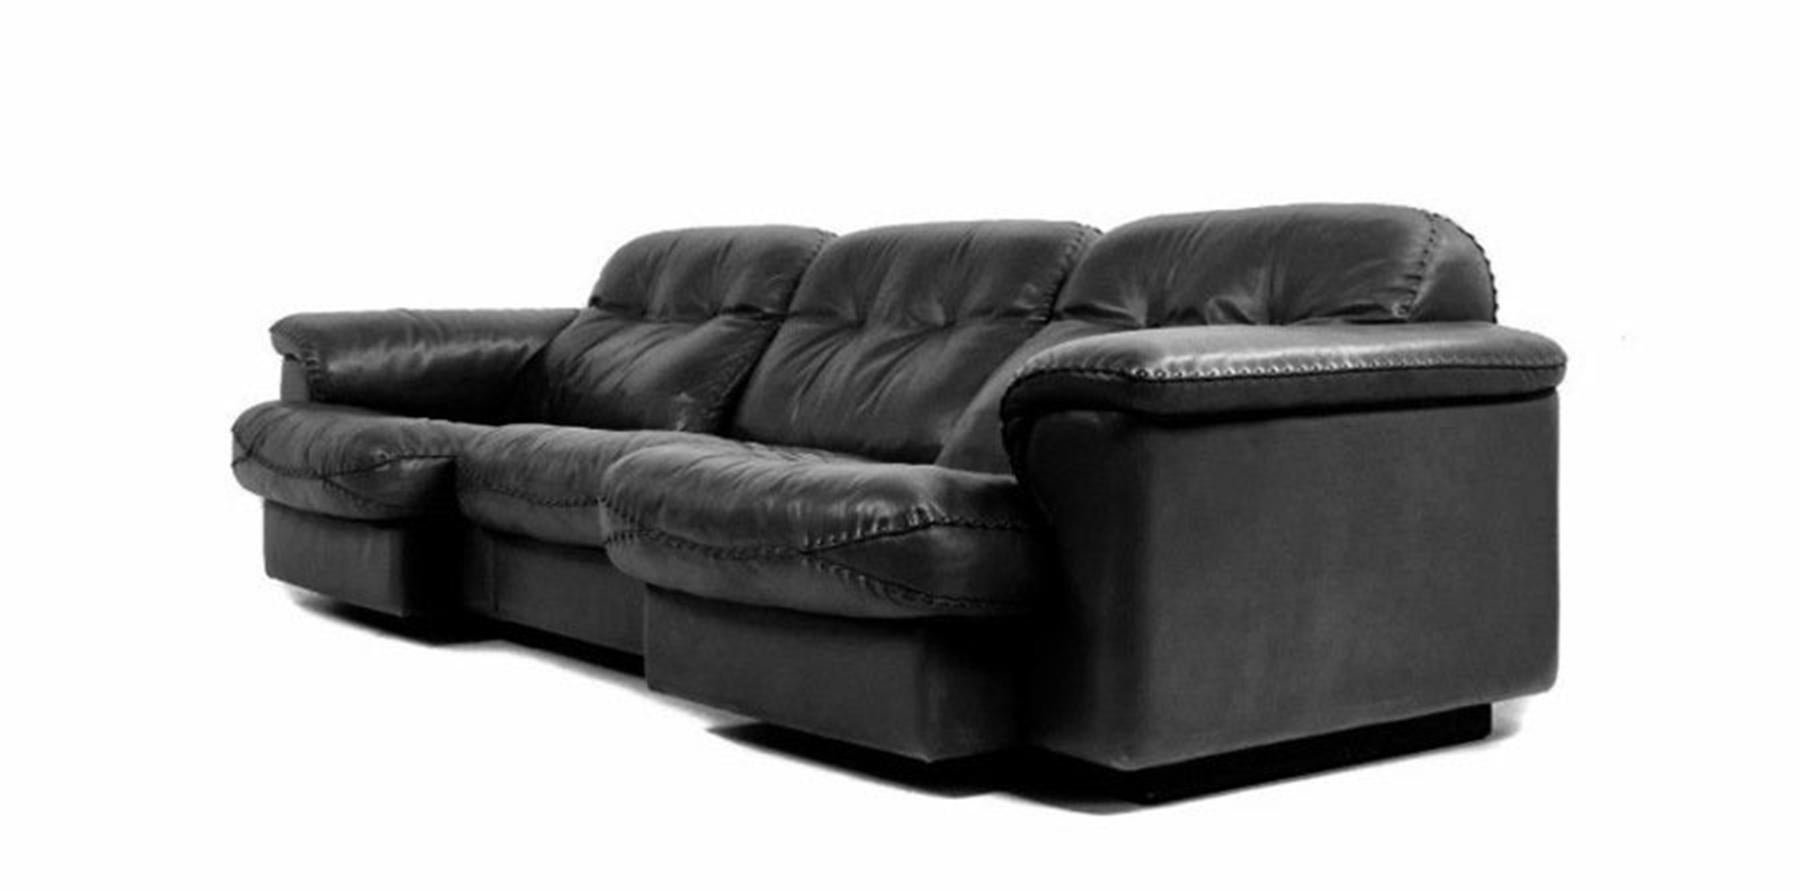 Late 20th Century DeSede 3 Seater Sofa in Black Leather